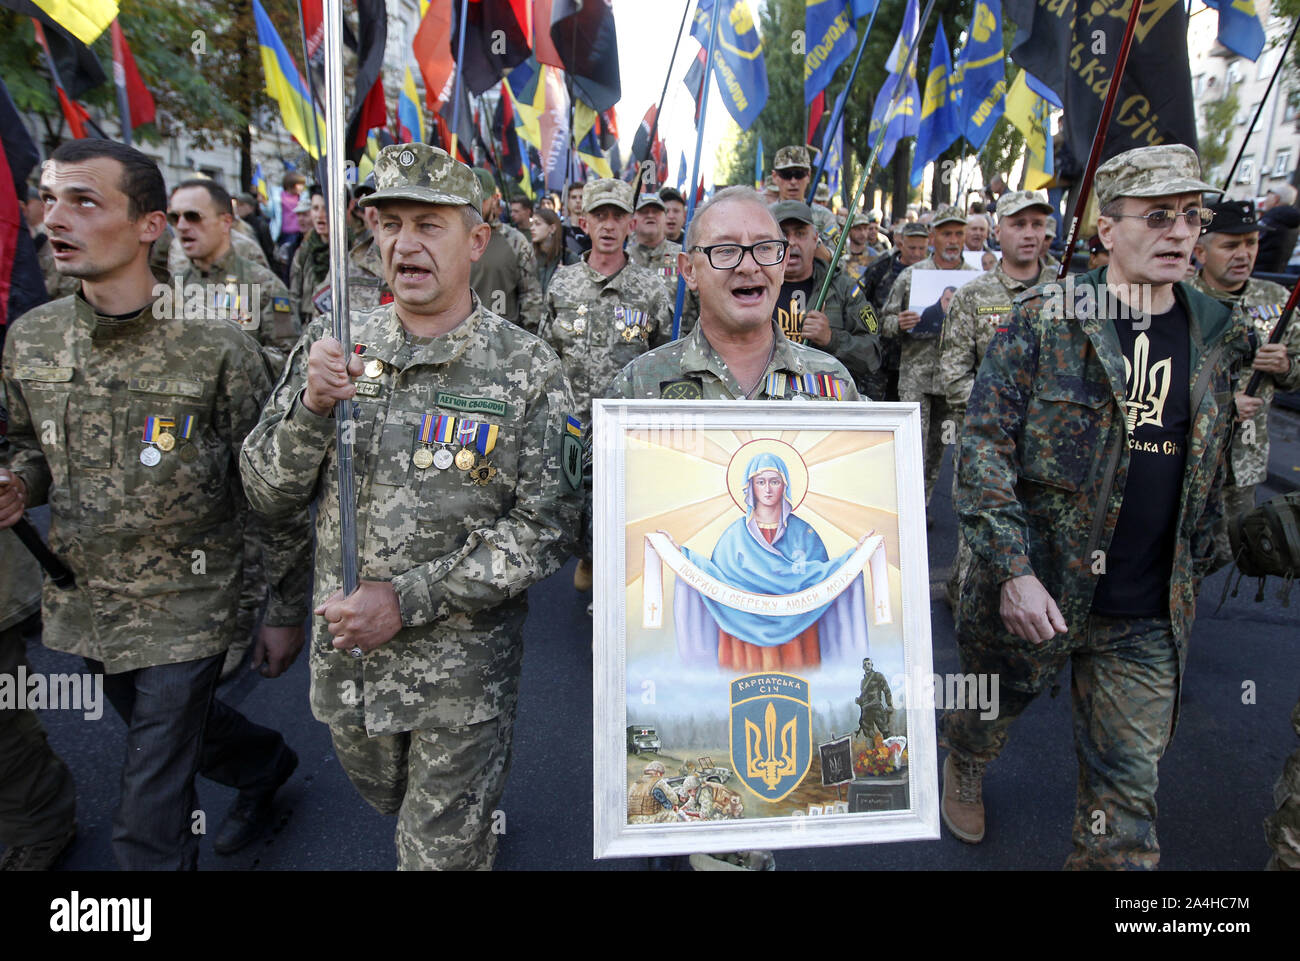 Kiev, Ukraine. 14th Oct, 2019. Ukrainian veterans who participated at the war conflict with pro-Russian separatist shout slogans during a march to celebrate the 77th anniversary of the founding of the Ukrainian Insurgent Army in Kiev, Ukraine, 14 October 2019. The Ukrainian Insurgent Army active fought for Ukrainian independence from 1942 to 1949, mostly in Western Ukraine, against the German and Soviet regimes. Credit: Serg Glovny/ZUMA Wire/Alamy Live News Stock Photo